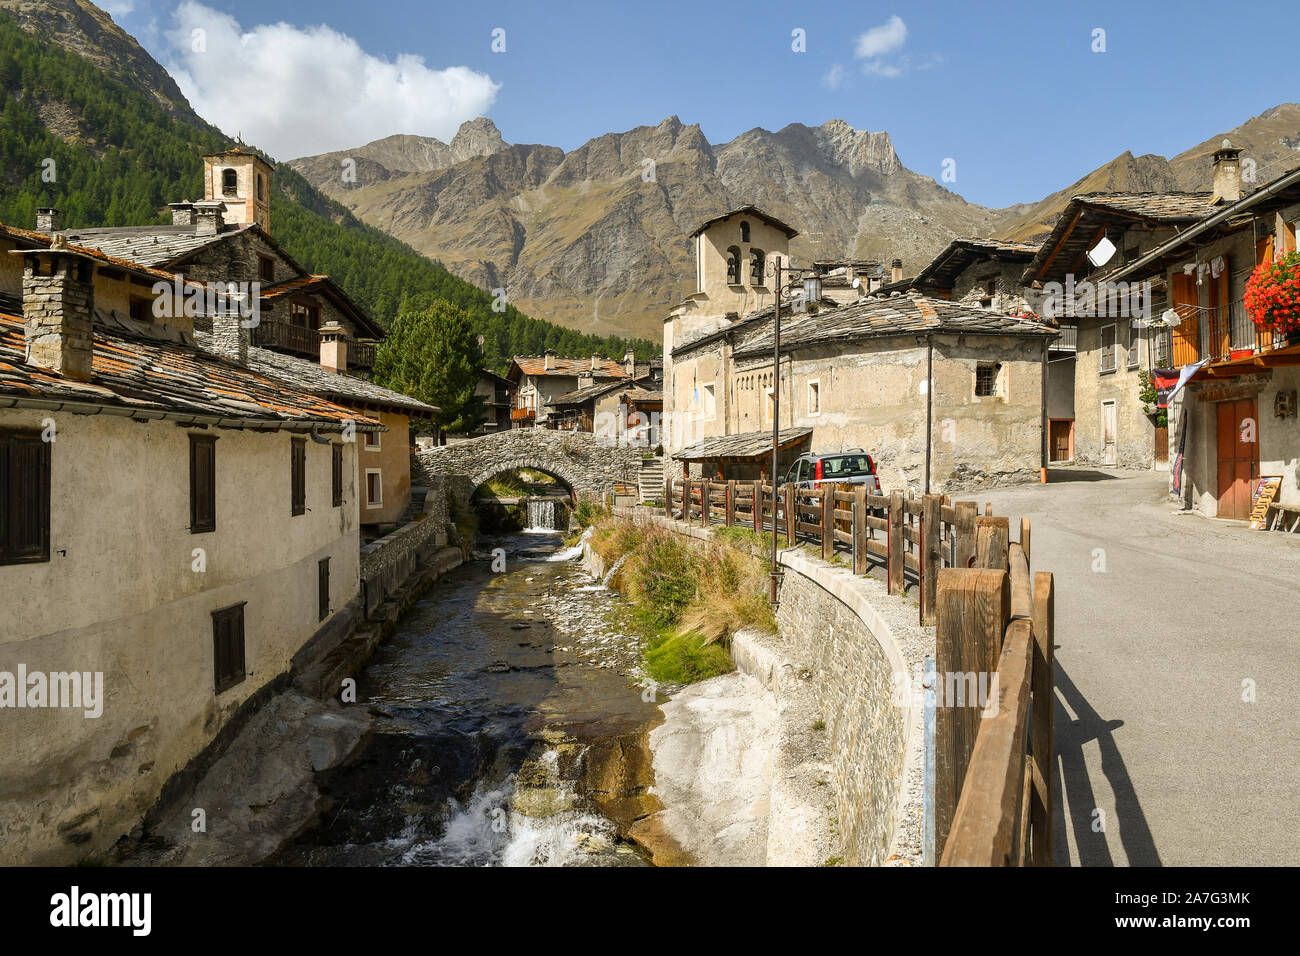 Scenic view of the Alpine village of Chianale, part of the Most Beautiful villages of Italy, with the Varaita river in summer, Cuneo, Piedmont, Italy Stock Photo